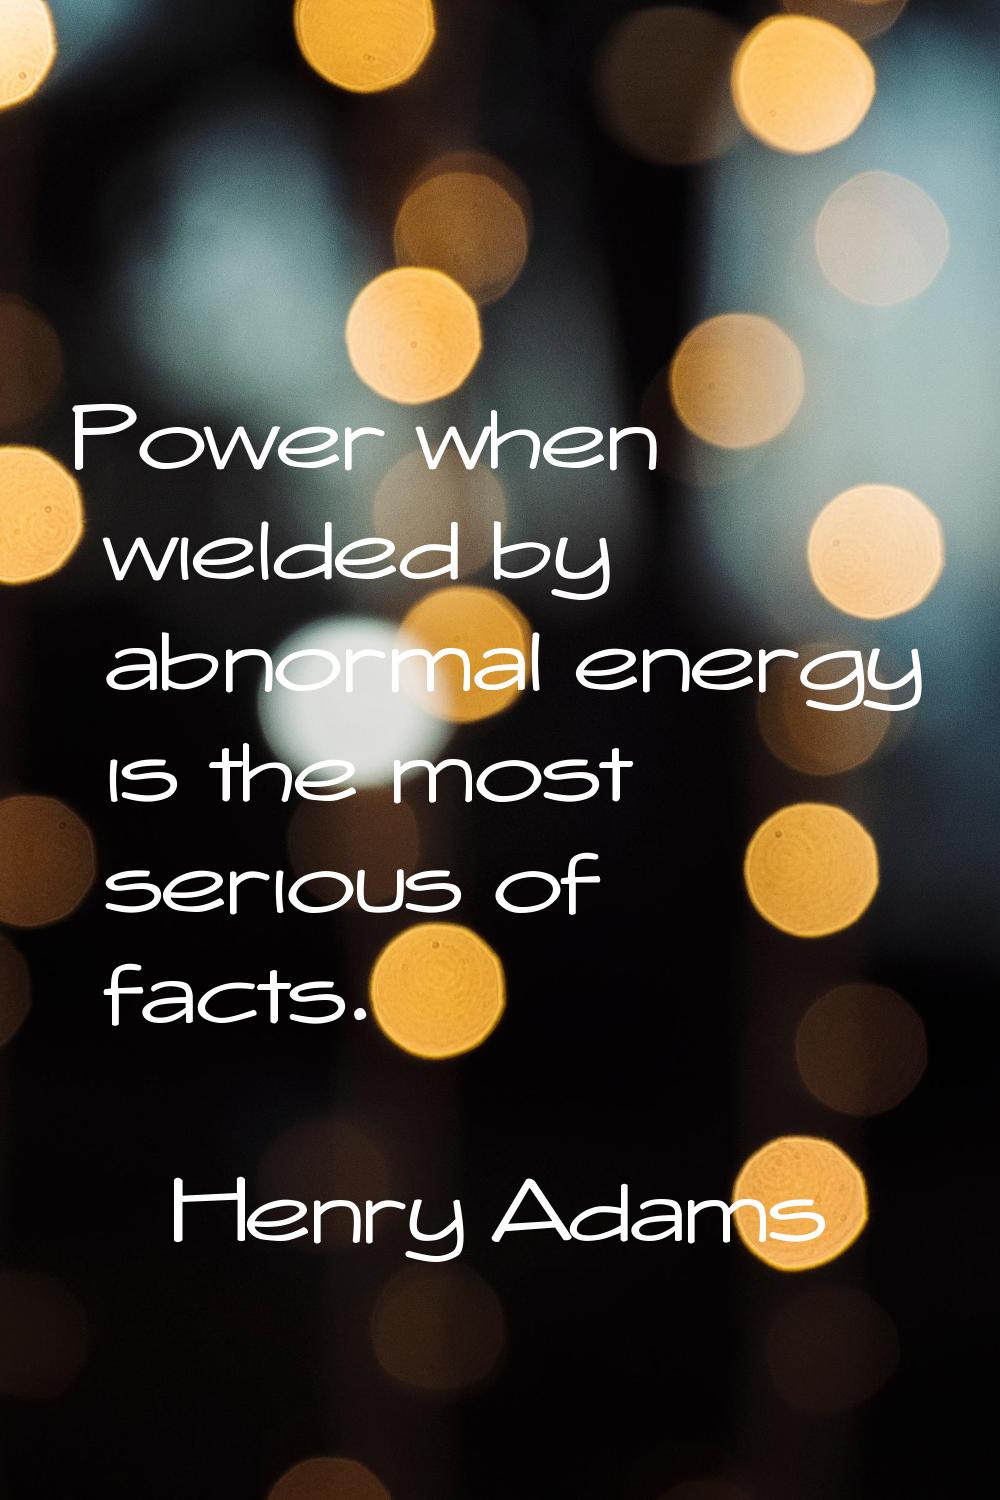 Power when wielded by abnormal energy is the most serious of facts.